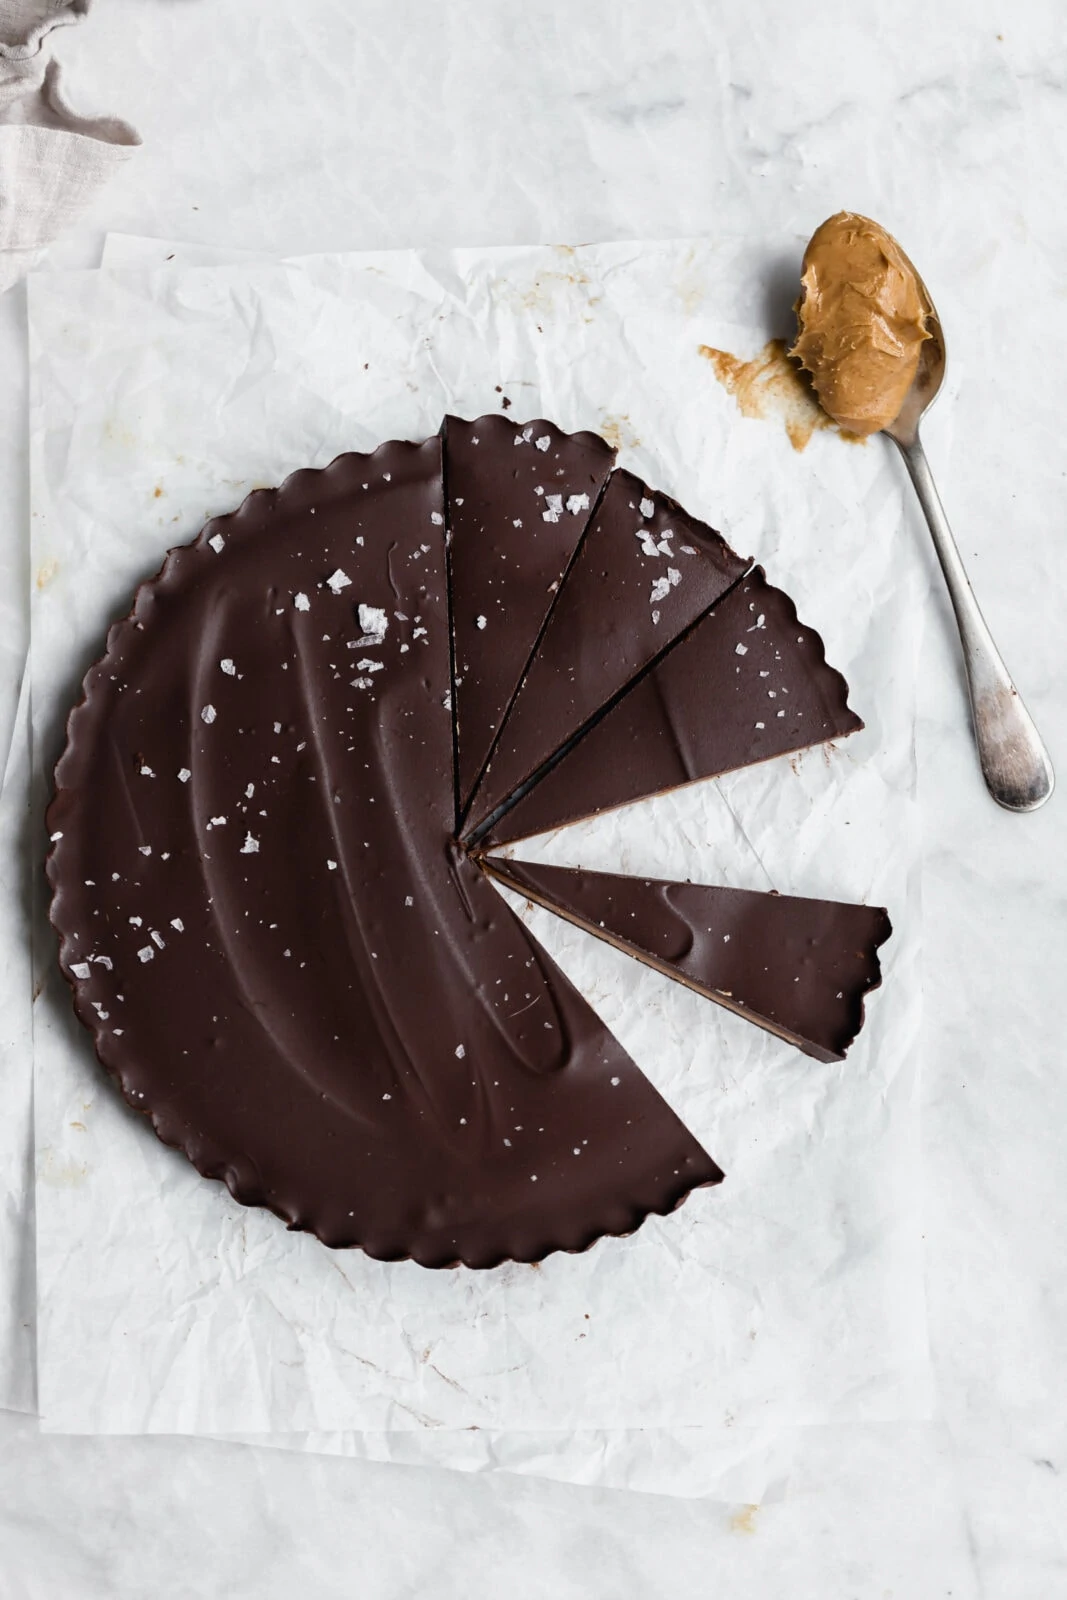 giant reeses peanut butter cup